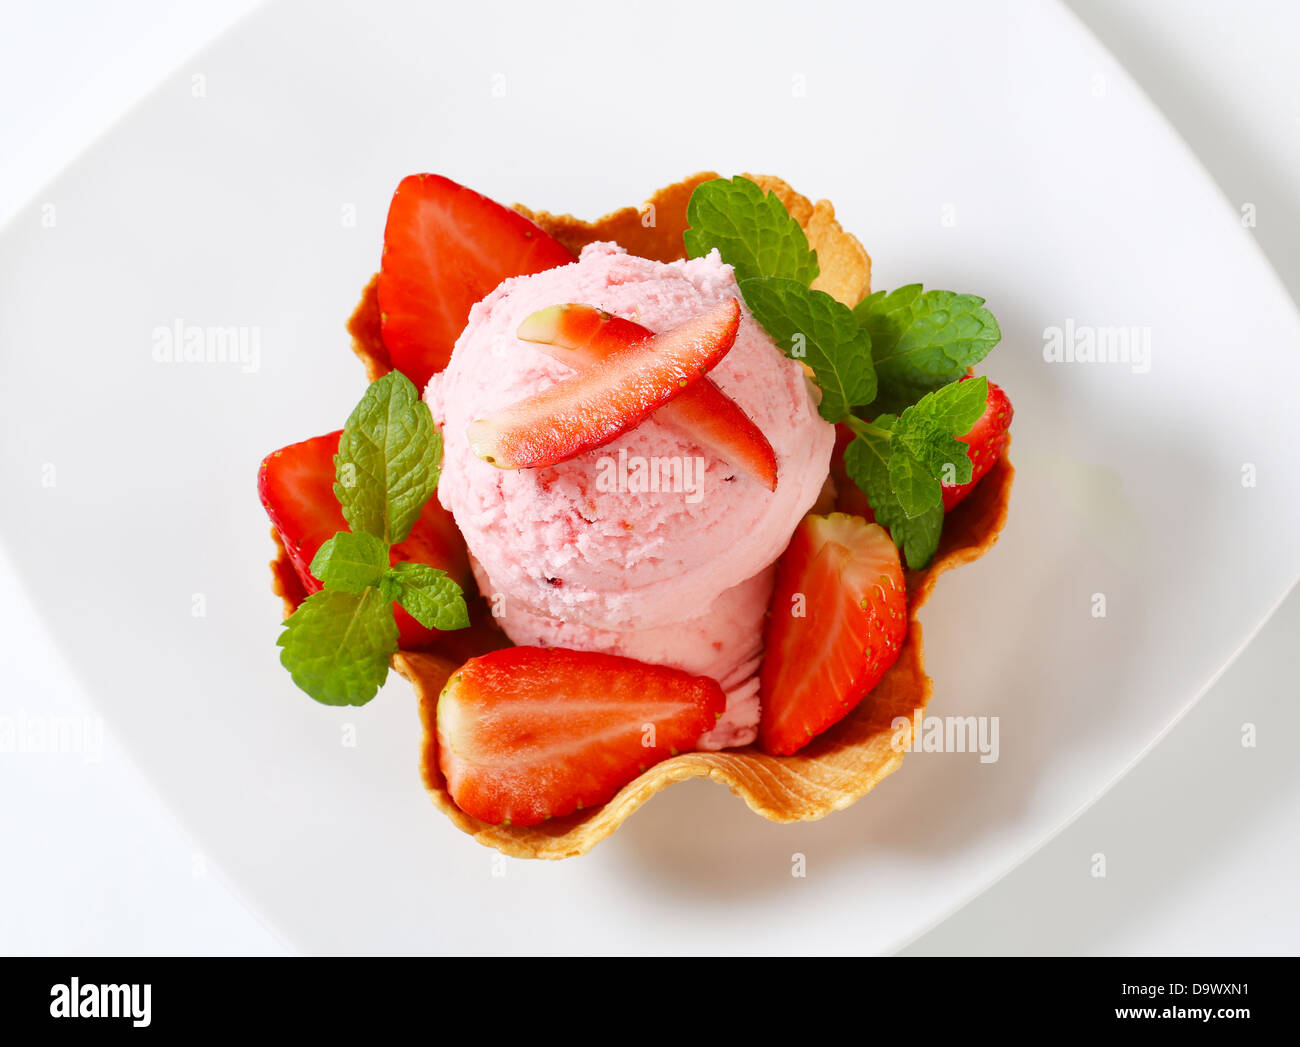 Scoops of strawberry ice cream in waffle basket Stock Photo